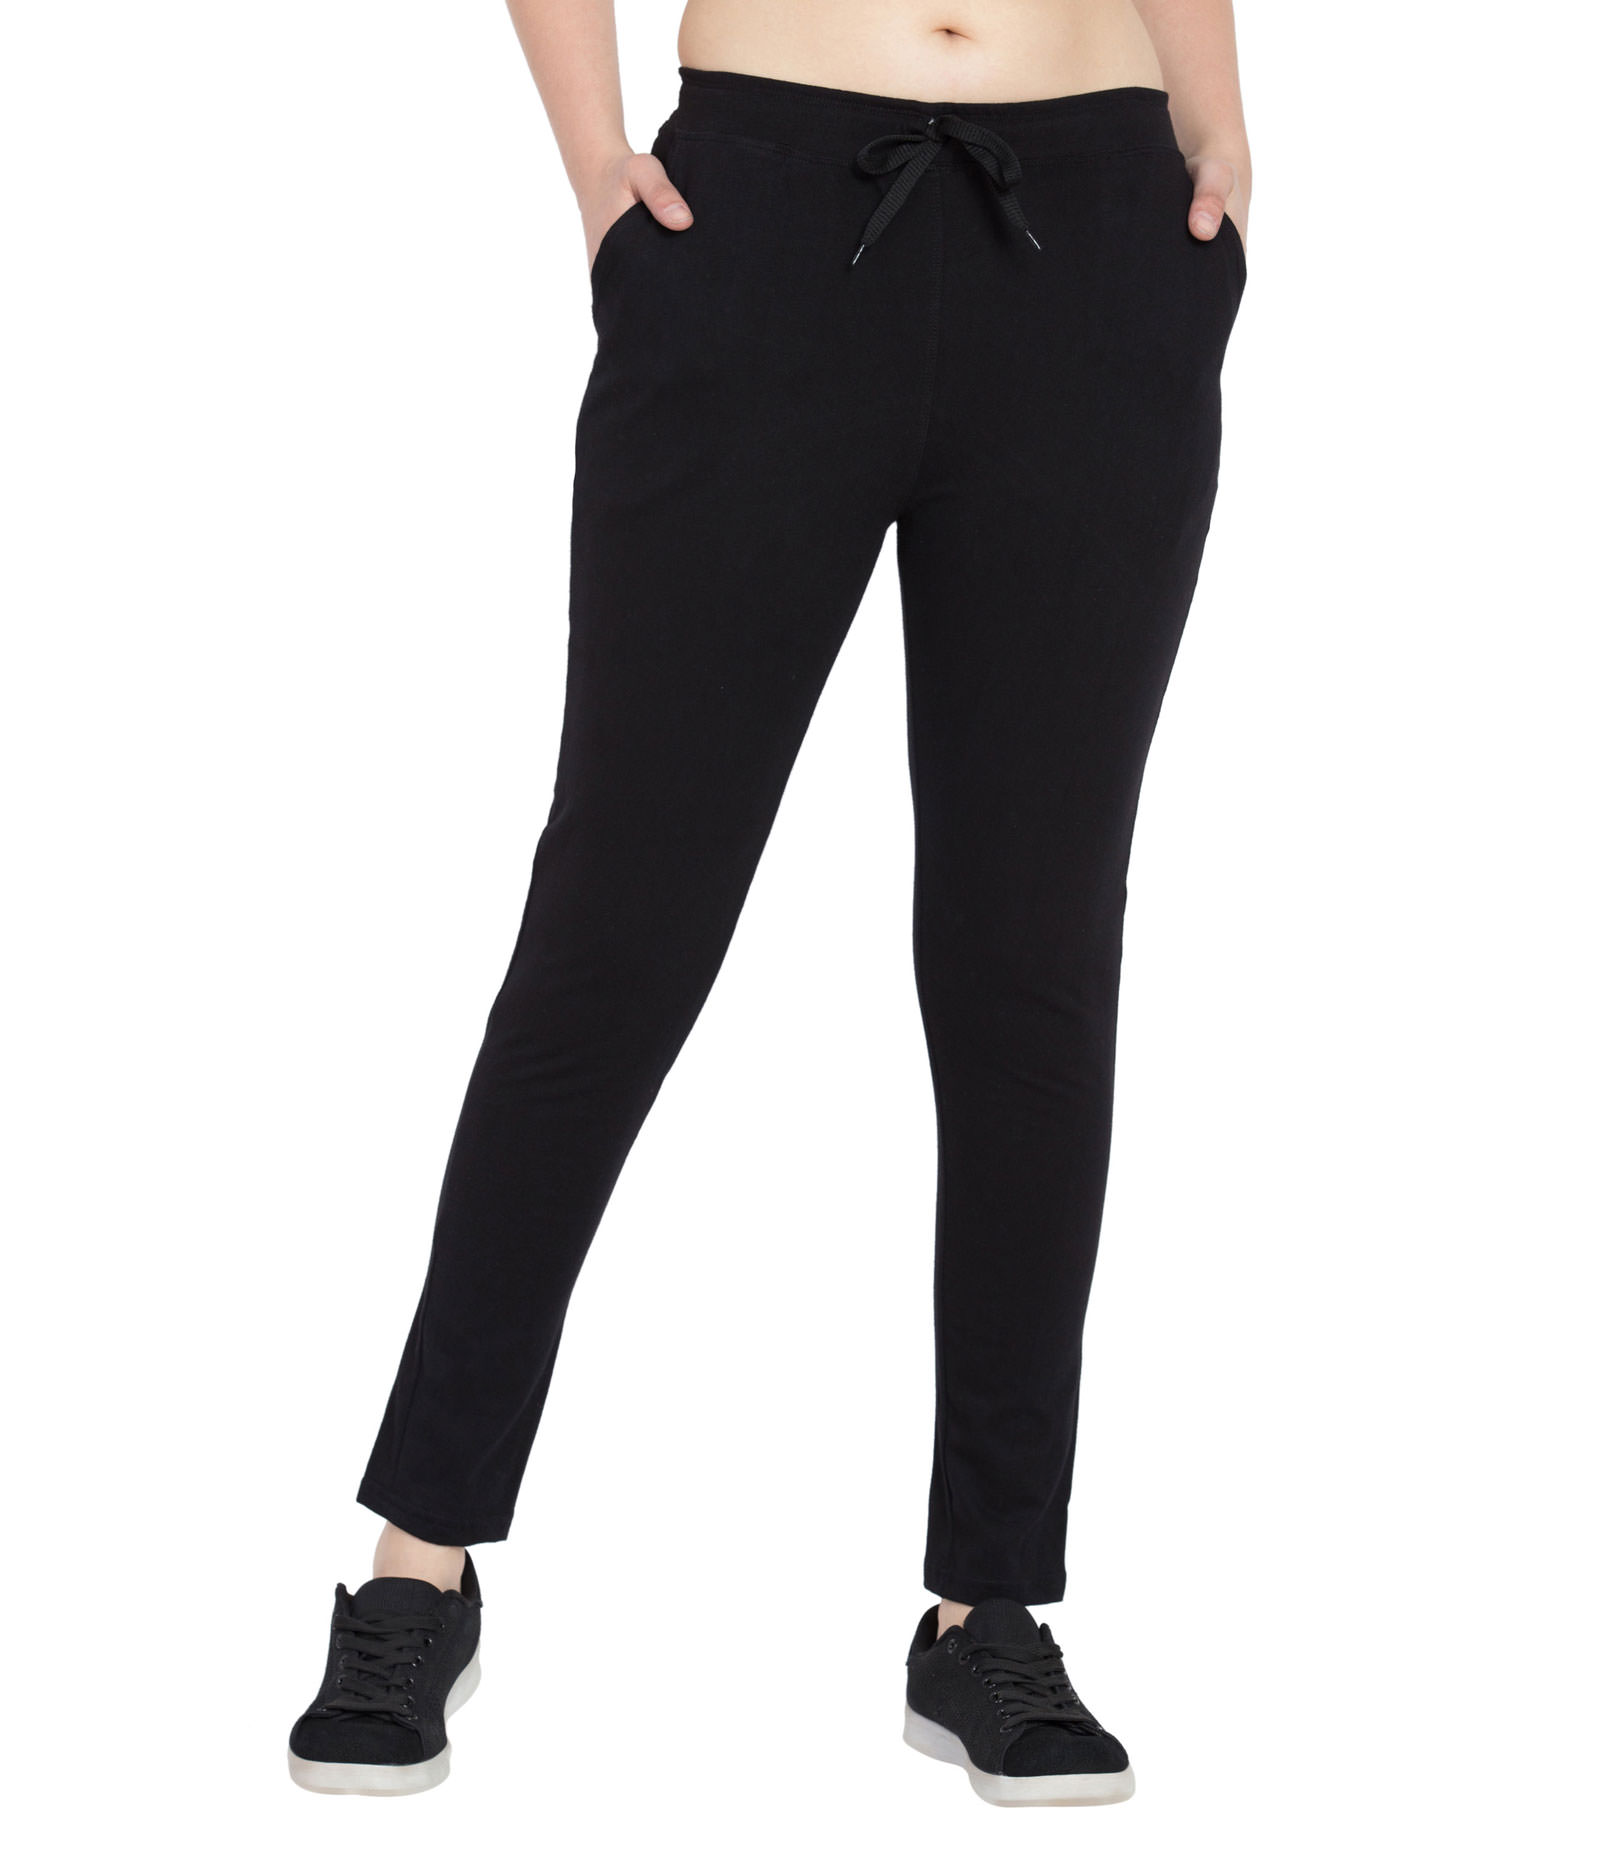 Buy Haoser Women's Trackpants Solid|Black Stylish Cotton Lowers for ...